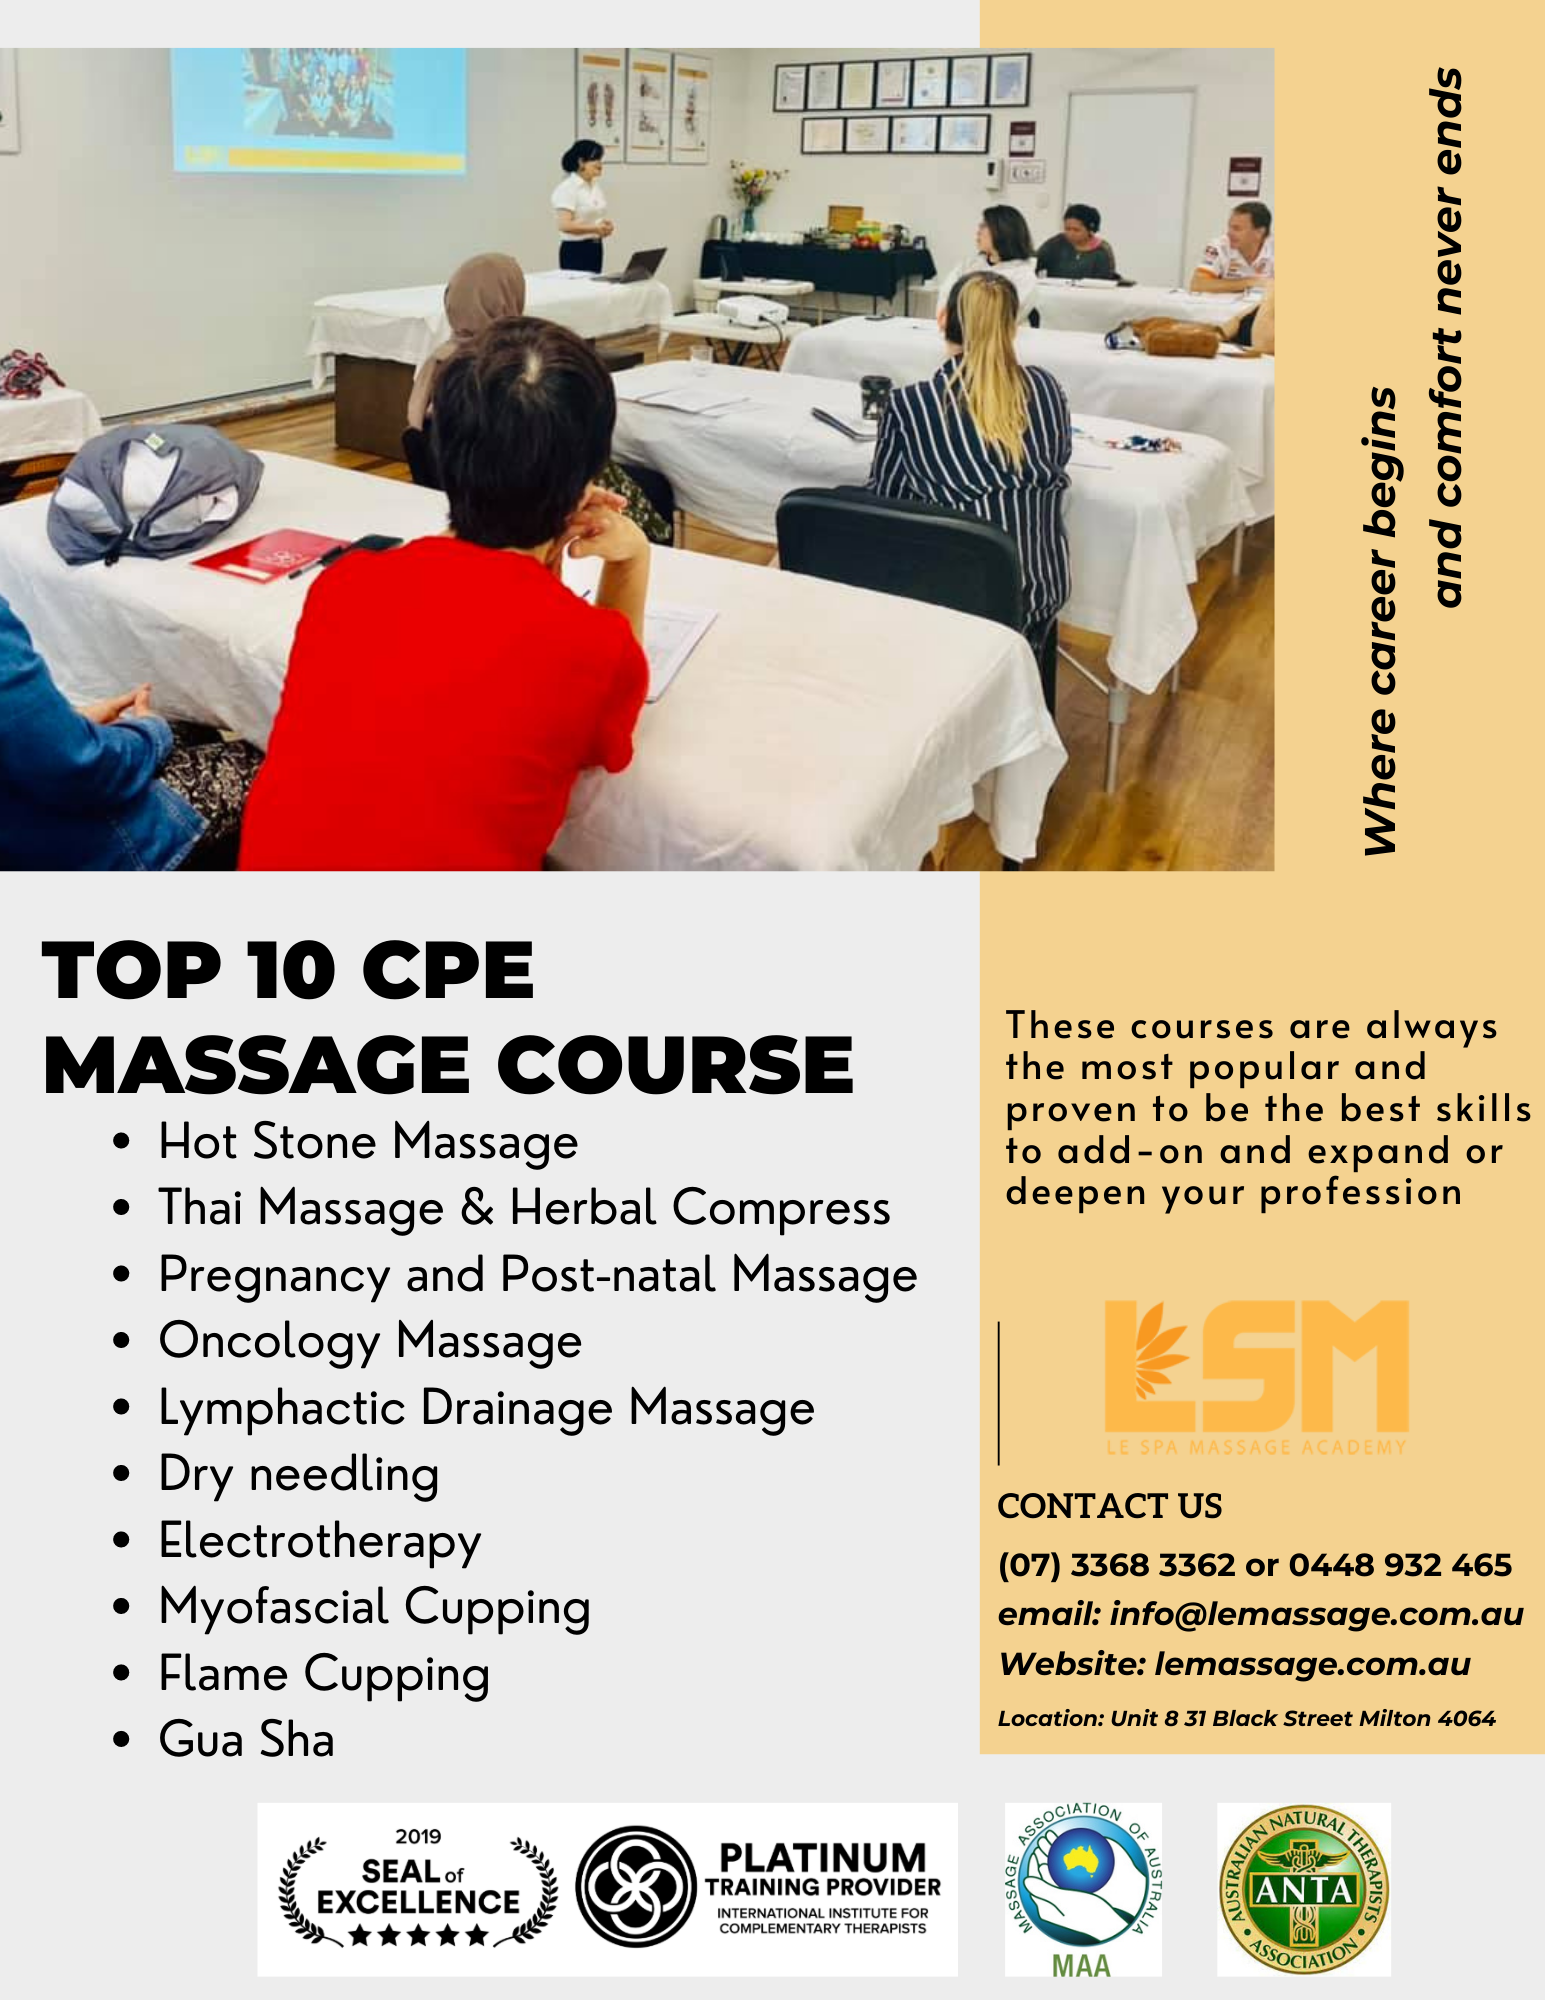 10 Most popular short courses for remedial massage therapists to take every year for continuing professional education (CPE) point